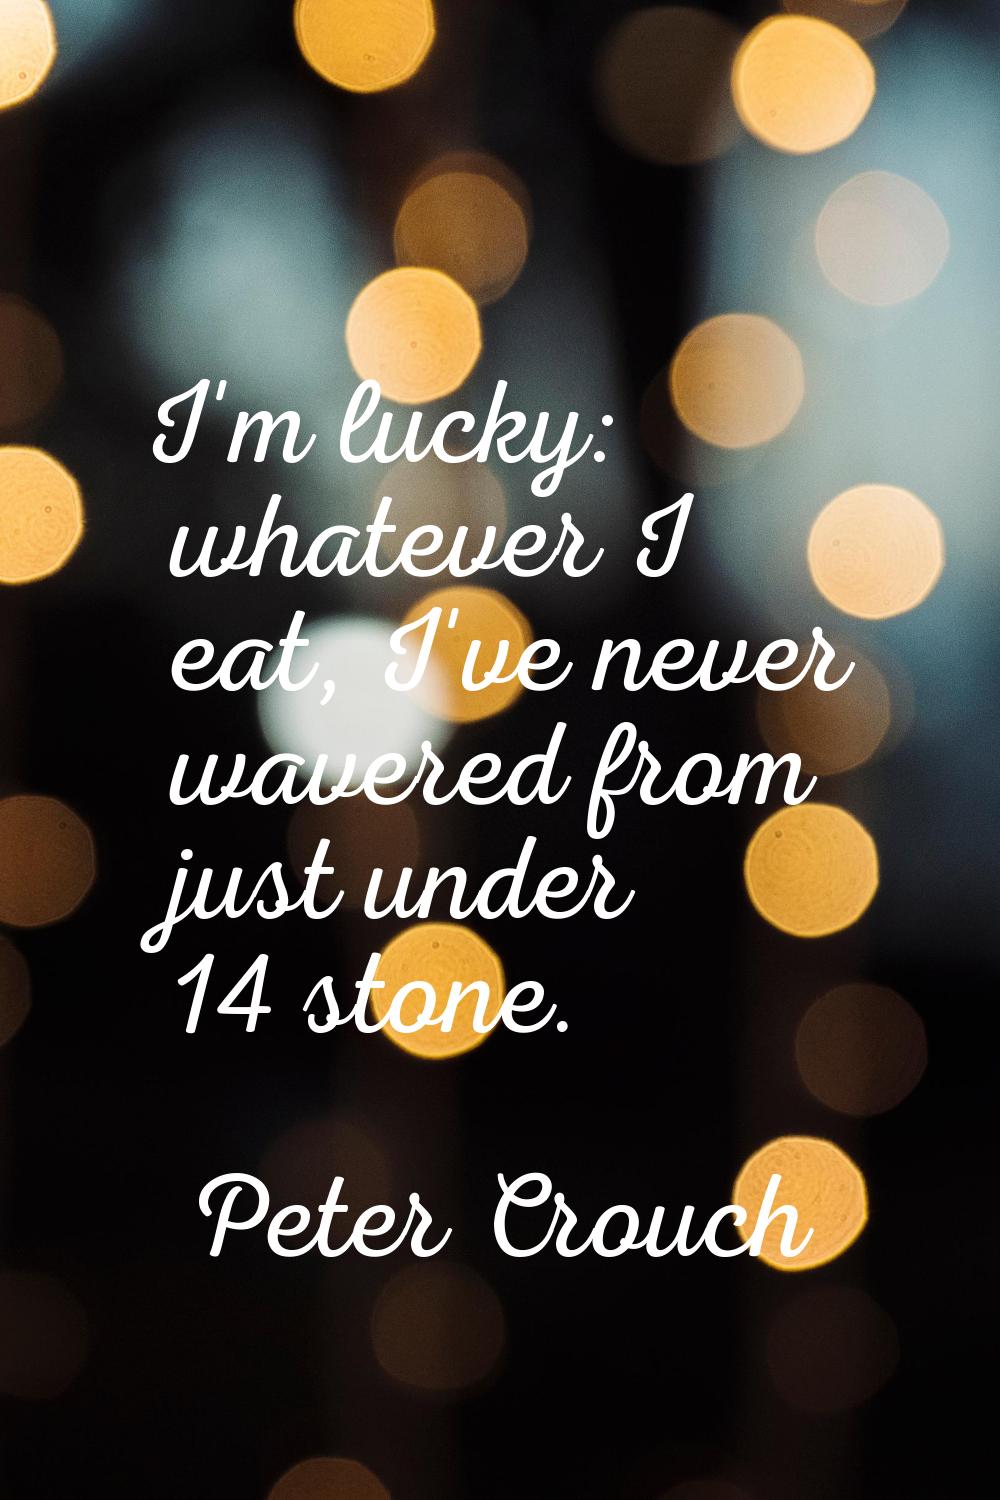 I'm lucky: whatever I eat, I've never wavered from just under 14 stone.